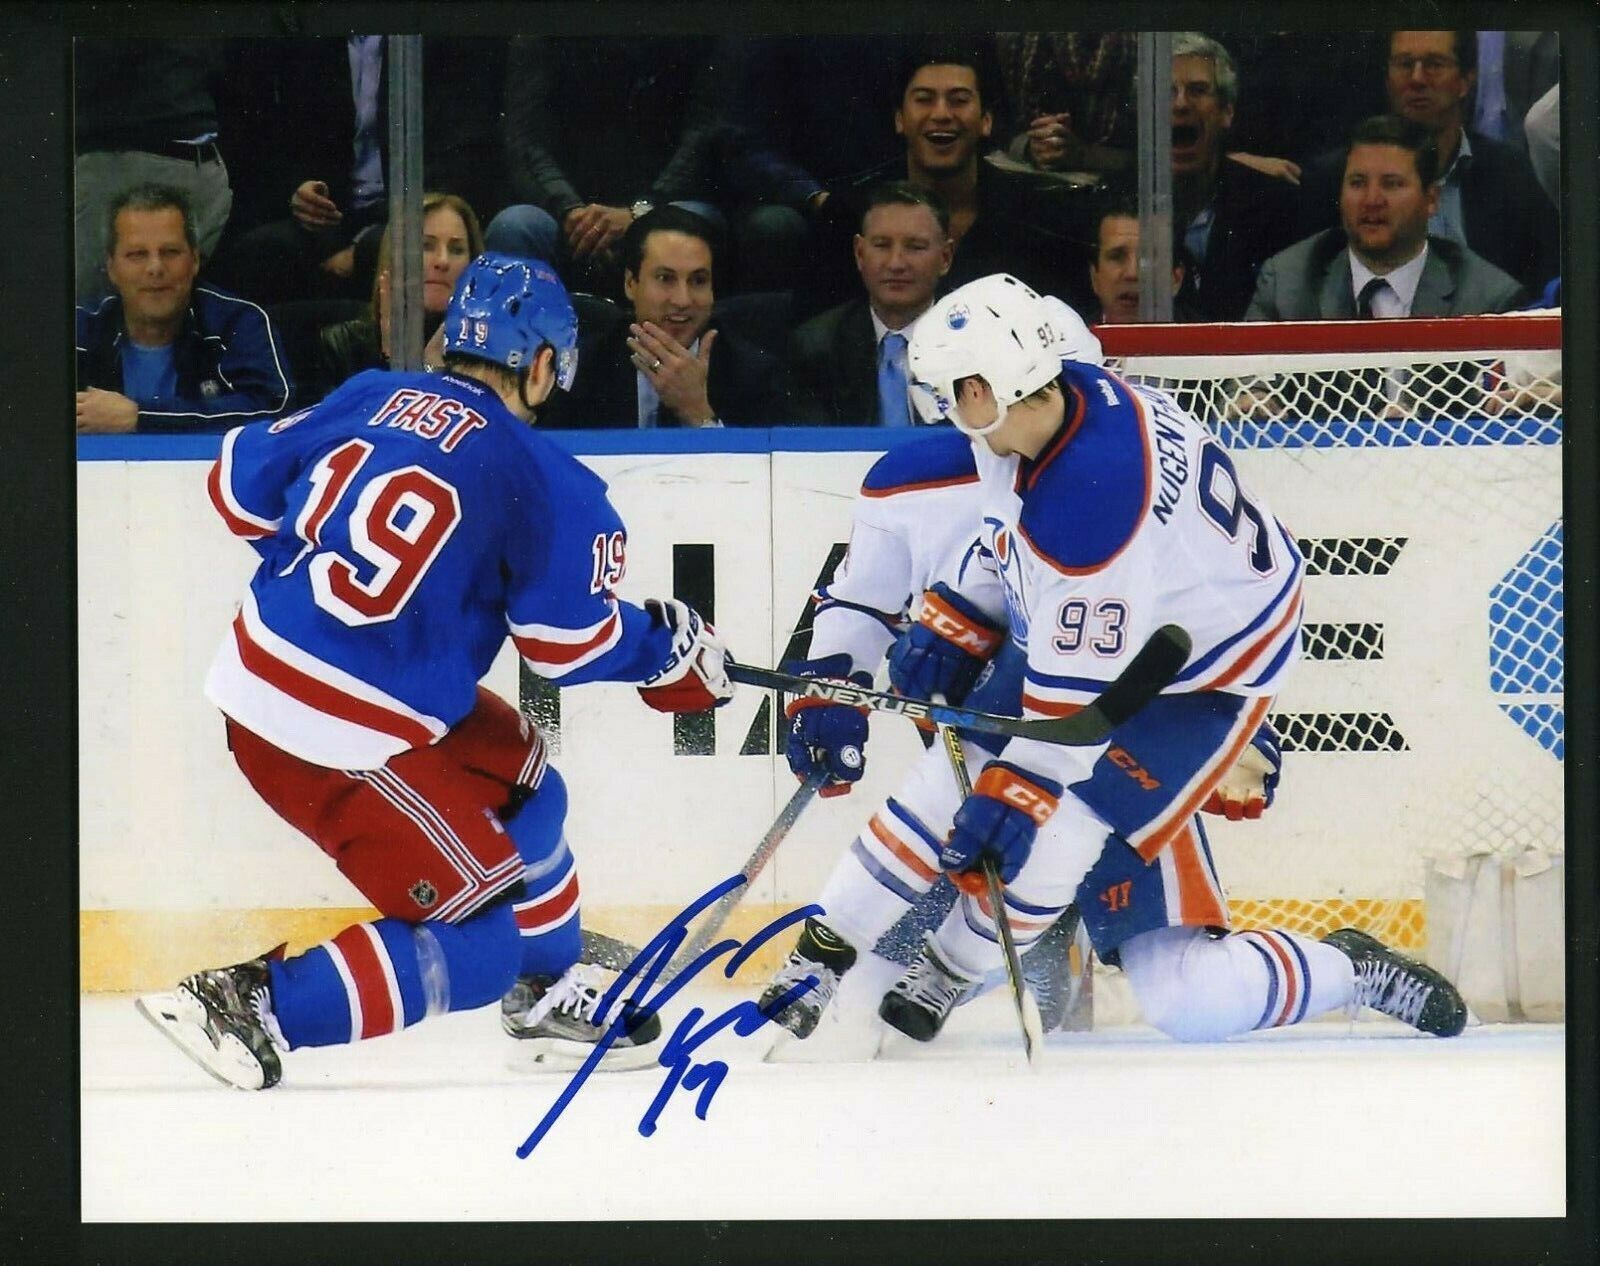 Jesper Fast Signed Autographed 8 x 10 Photo Poster painting New York Rangers vs. Oilers